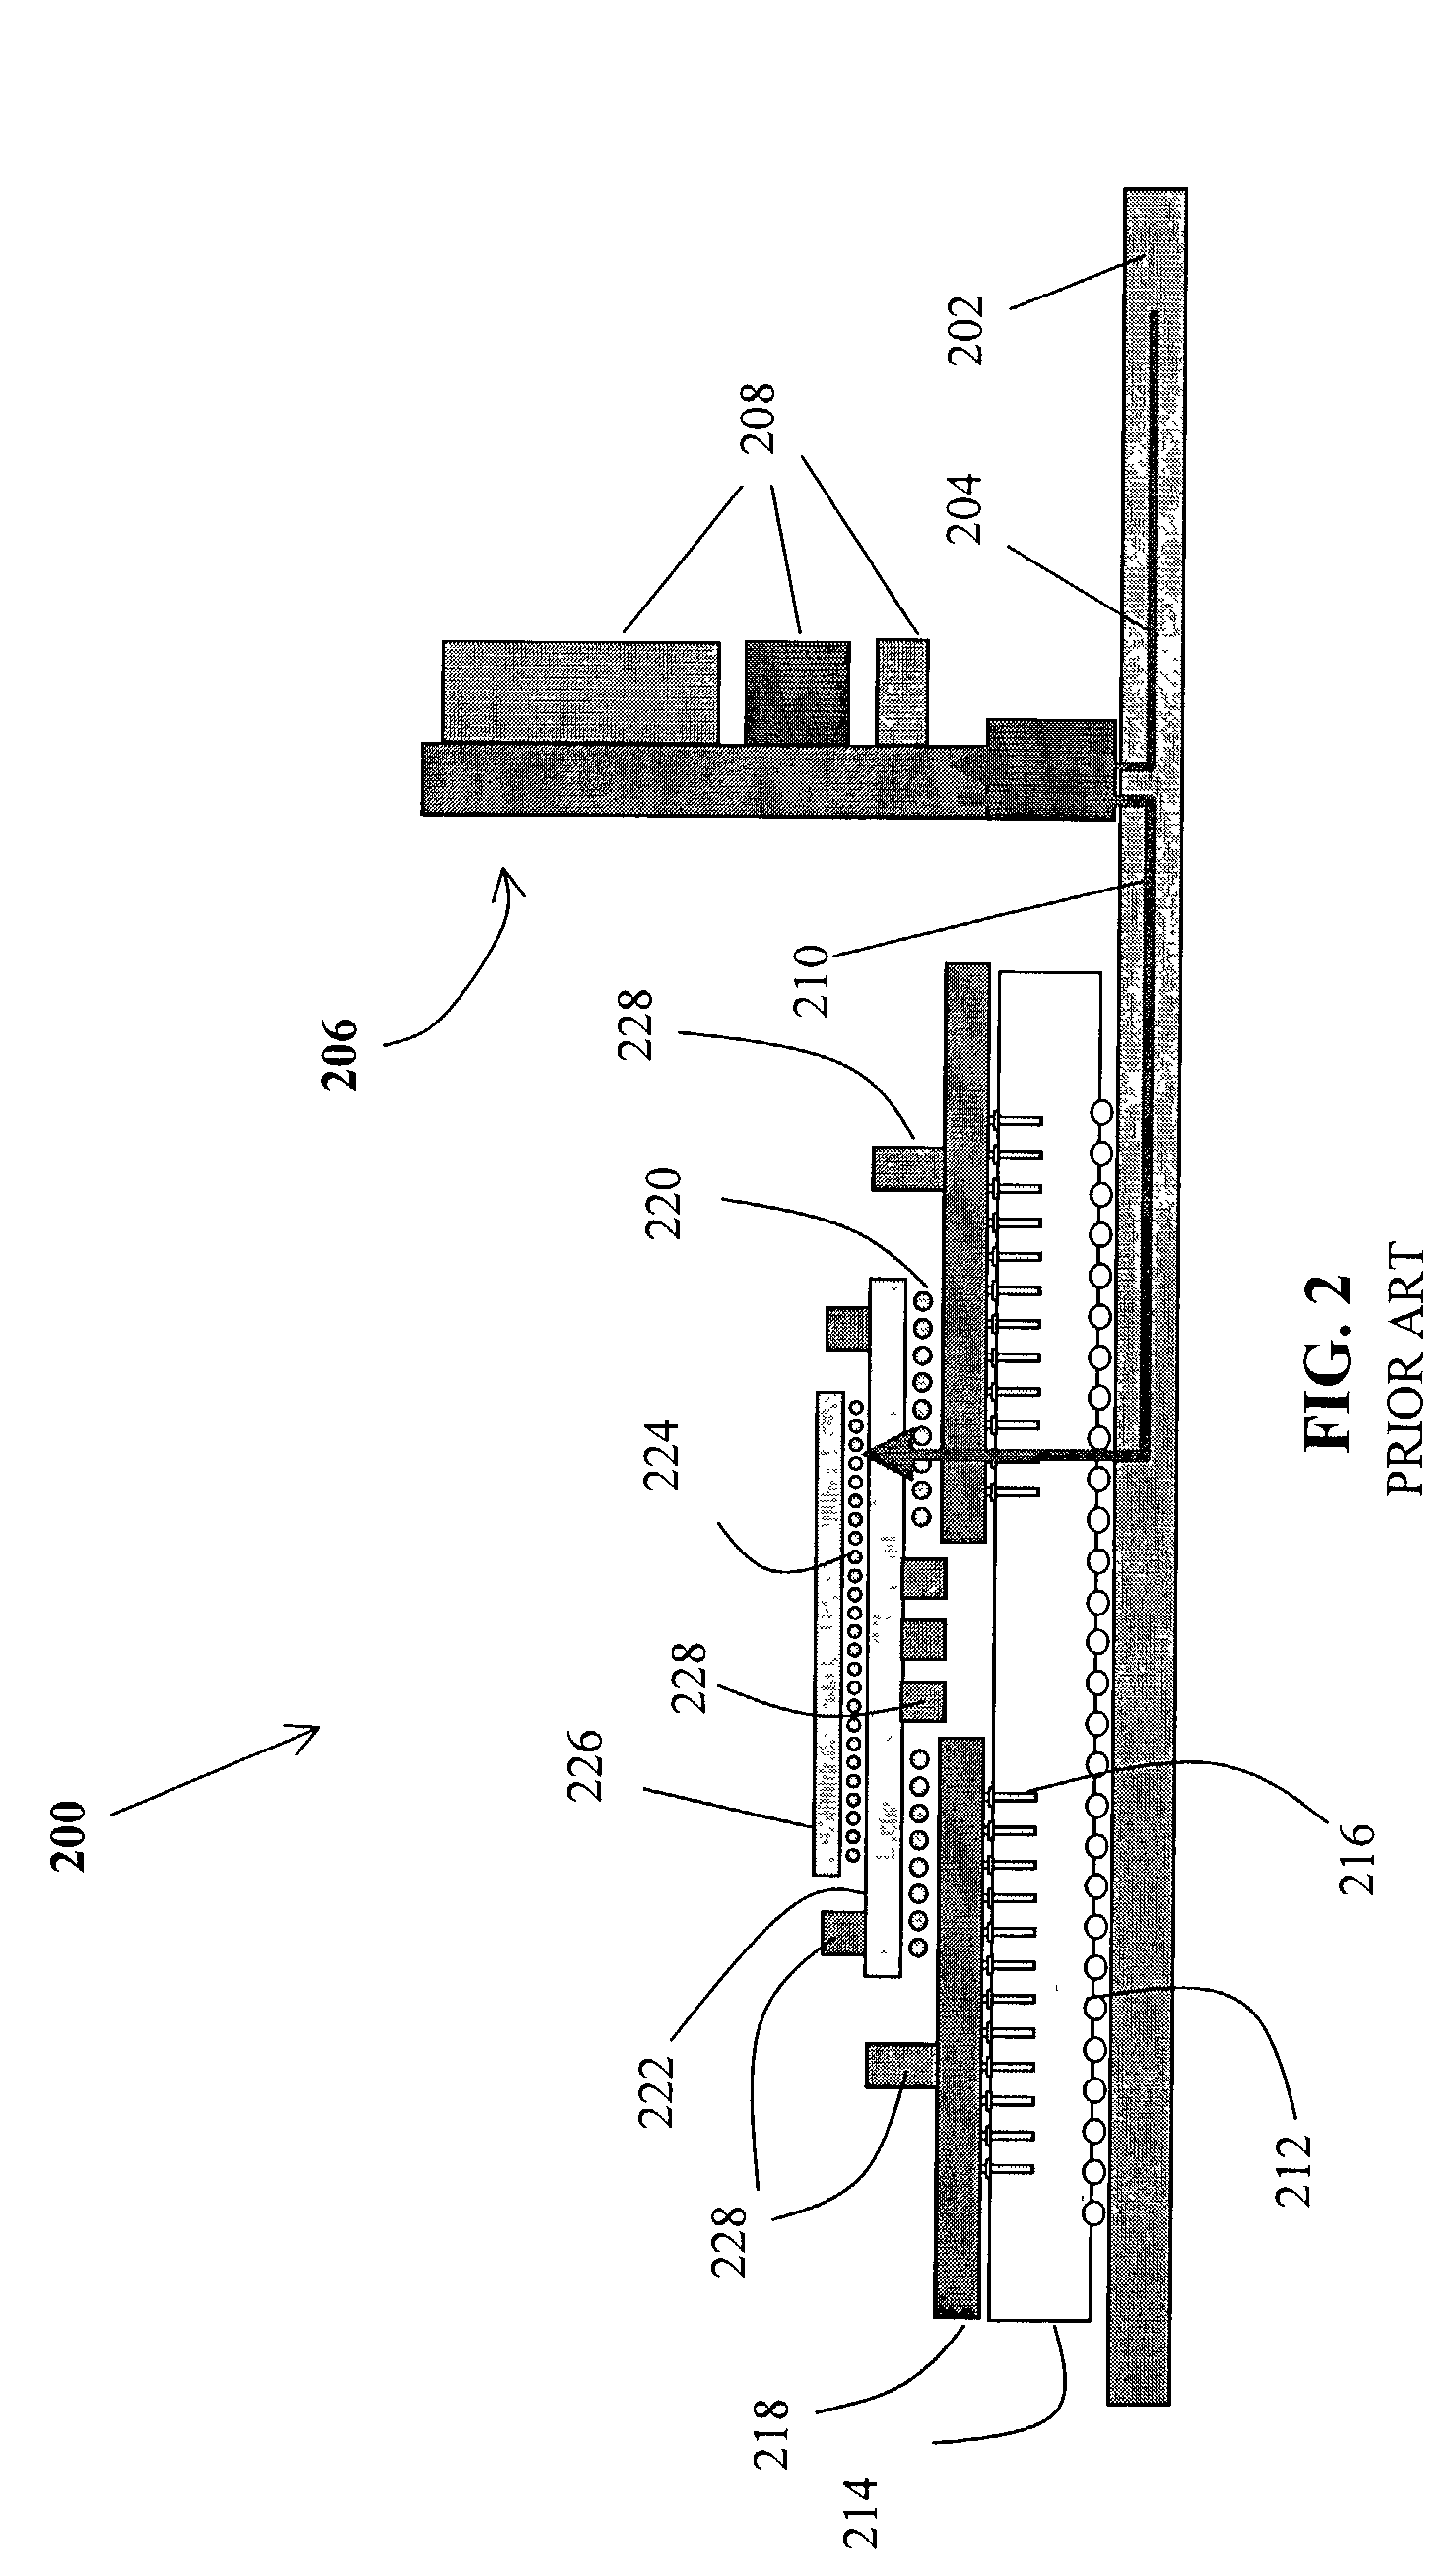 Method and apparatus for providing power to a microprocessor with integrated thermal and EMI management